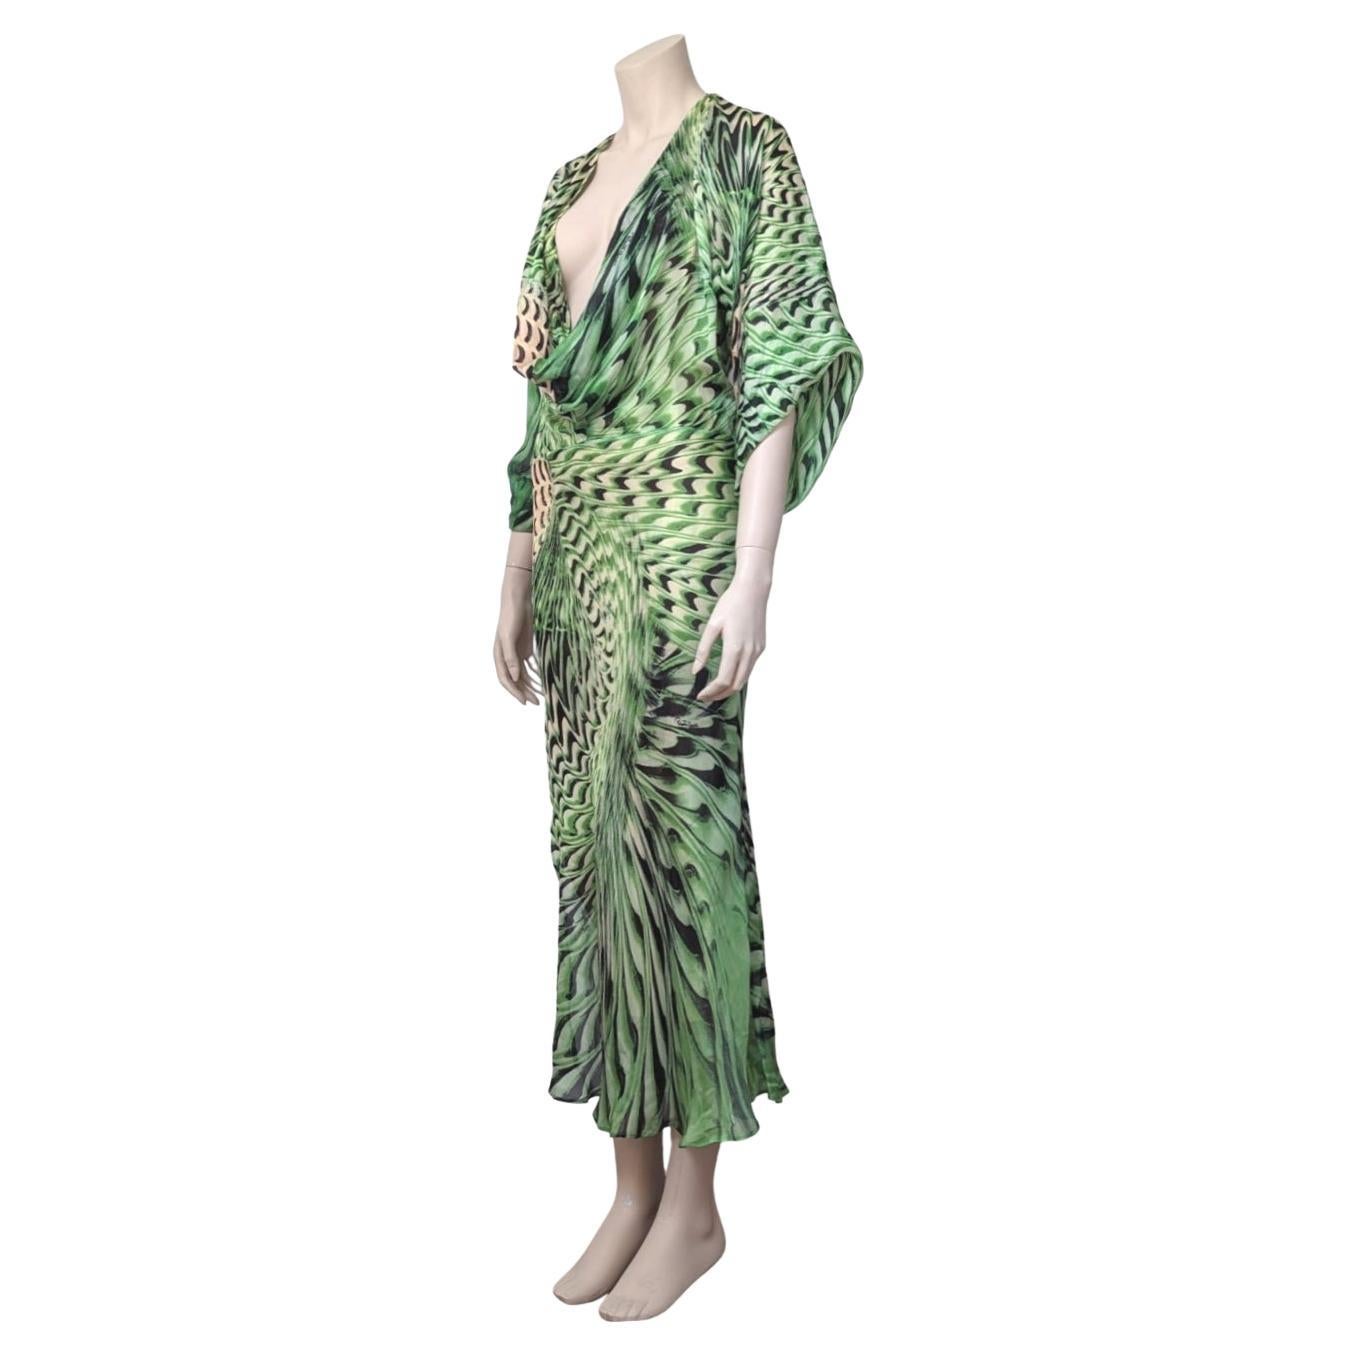 Sheer psychedelic green silk high slit. Seen on the Spring / Summer 2001 runway.

· Comes with a beige silk deep V neckline under dress 
· Invisible Buttons on the side
· Mermaid Cut

Fits S - Original tag Label XXS

Flat measurements :

Breast : 40